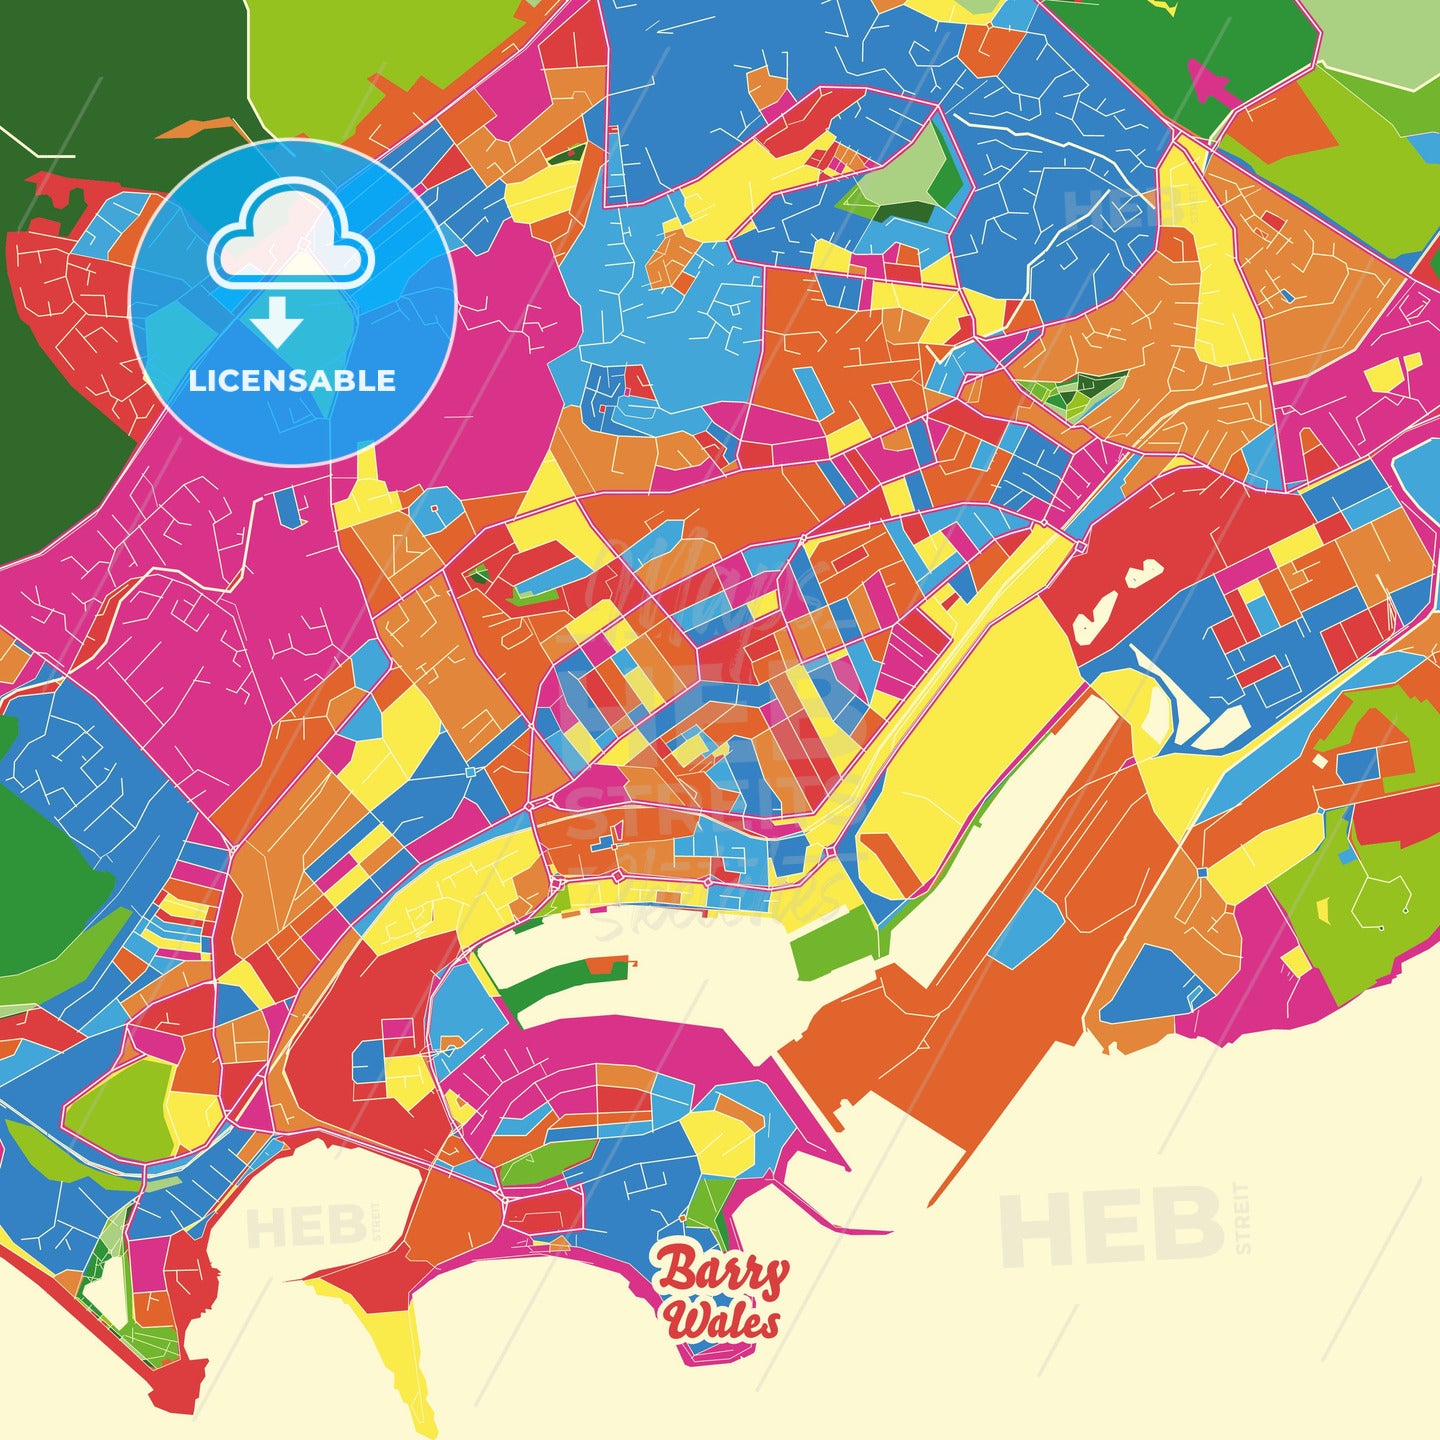 Barry, Wales Crazy Colorful Street Map Poster Template - HEBSTREITS Sketches